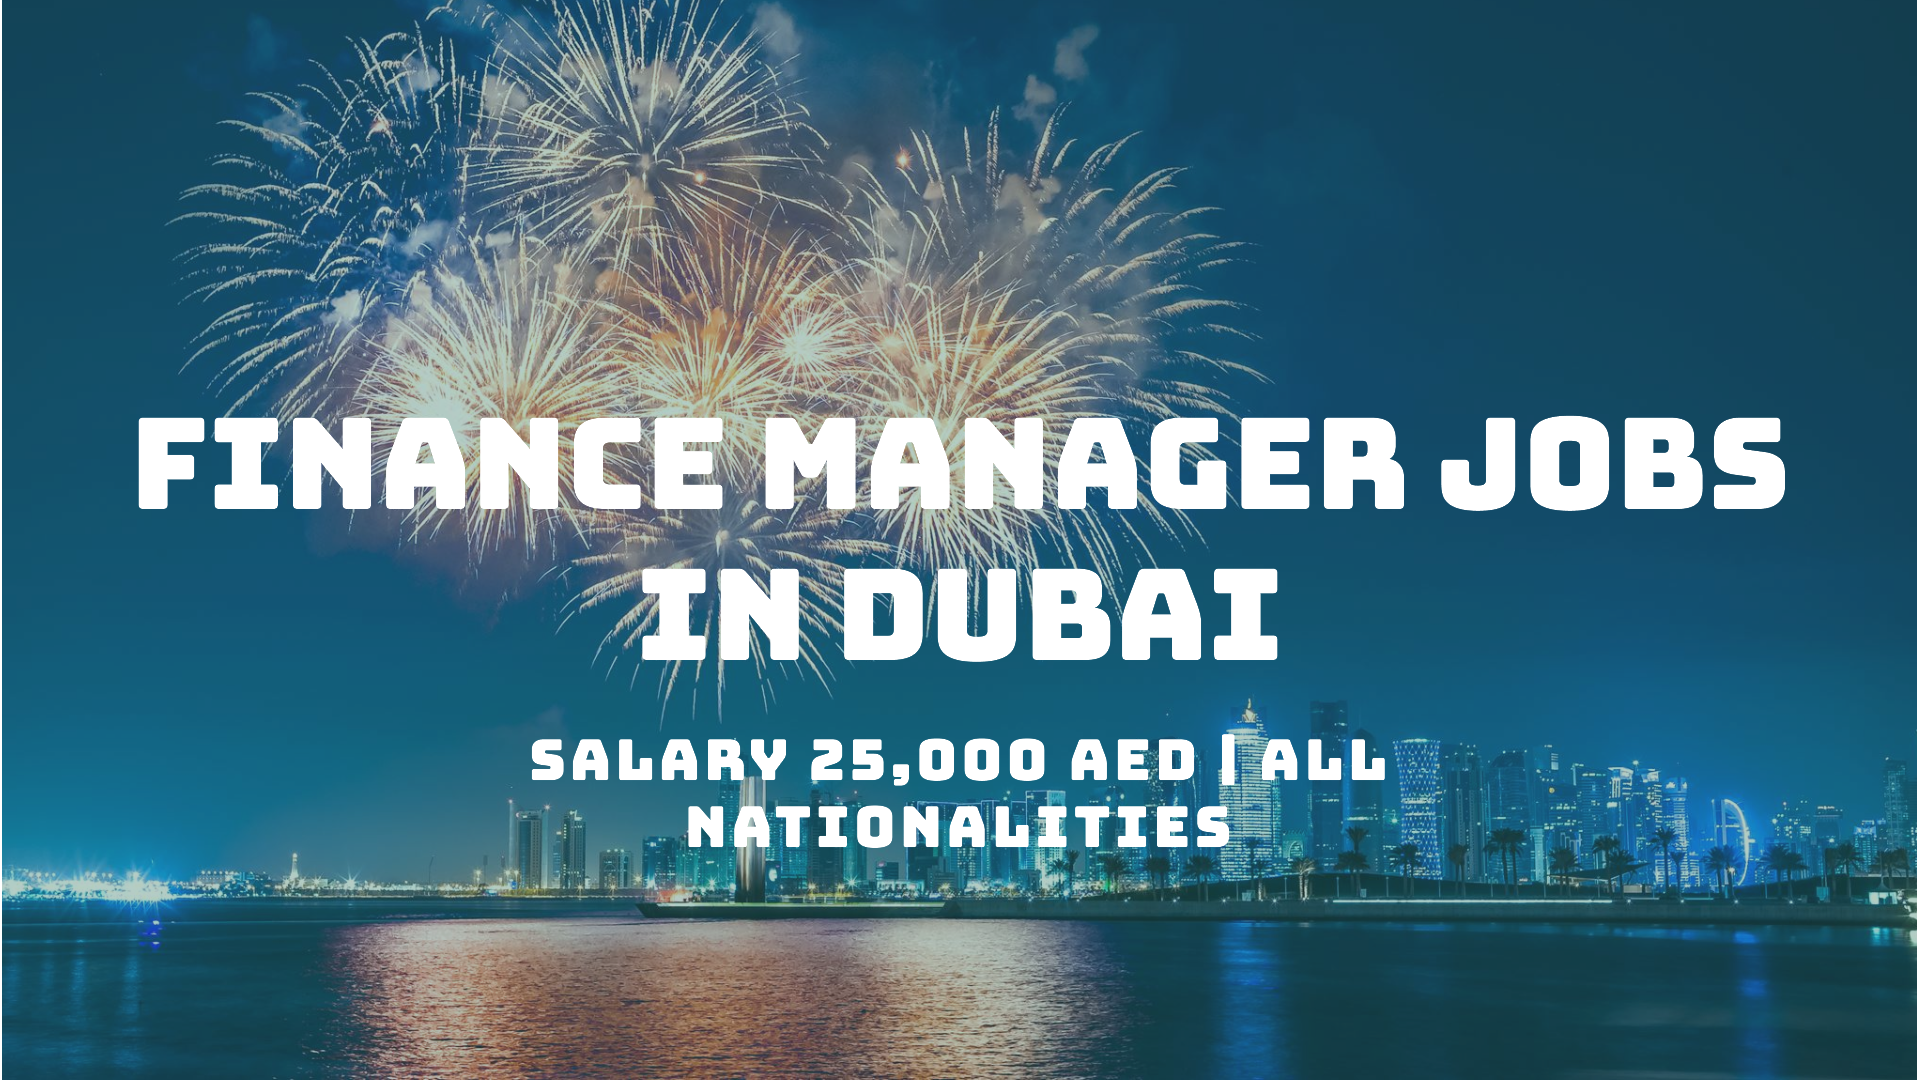 finance manager jobs dubai for all nationalities with salary 25,000 AED